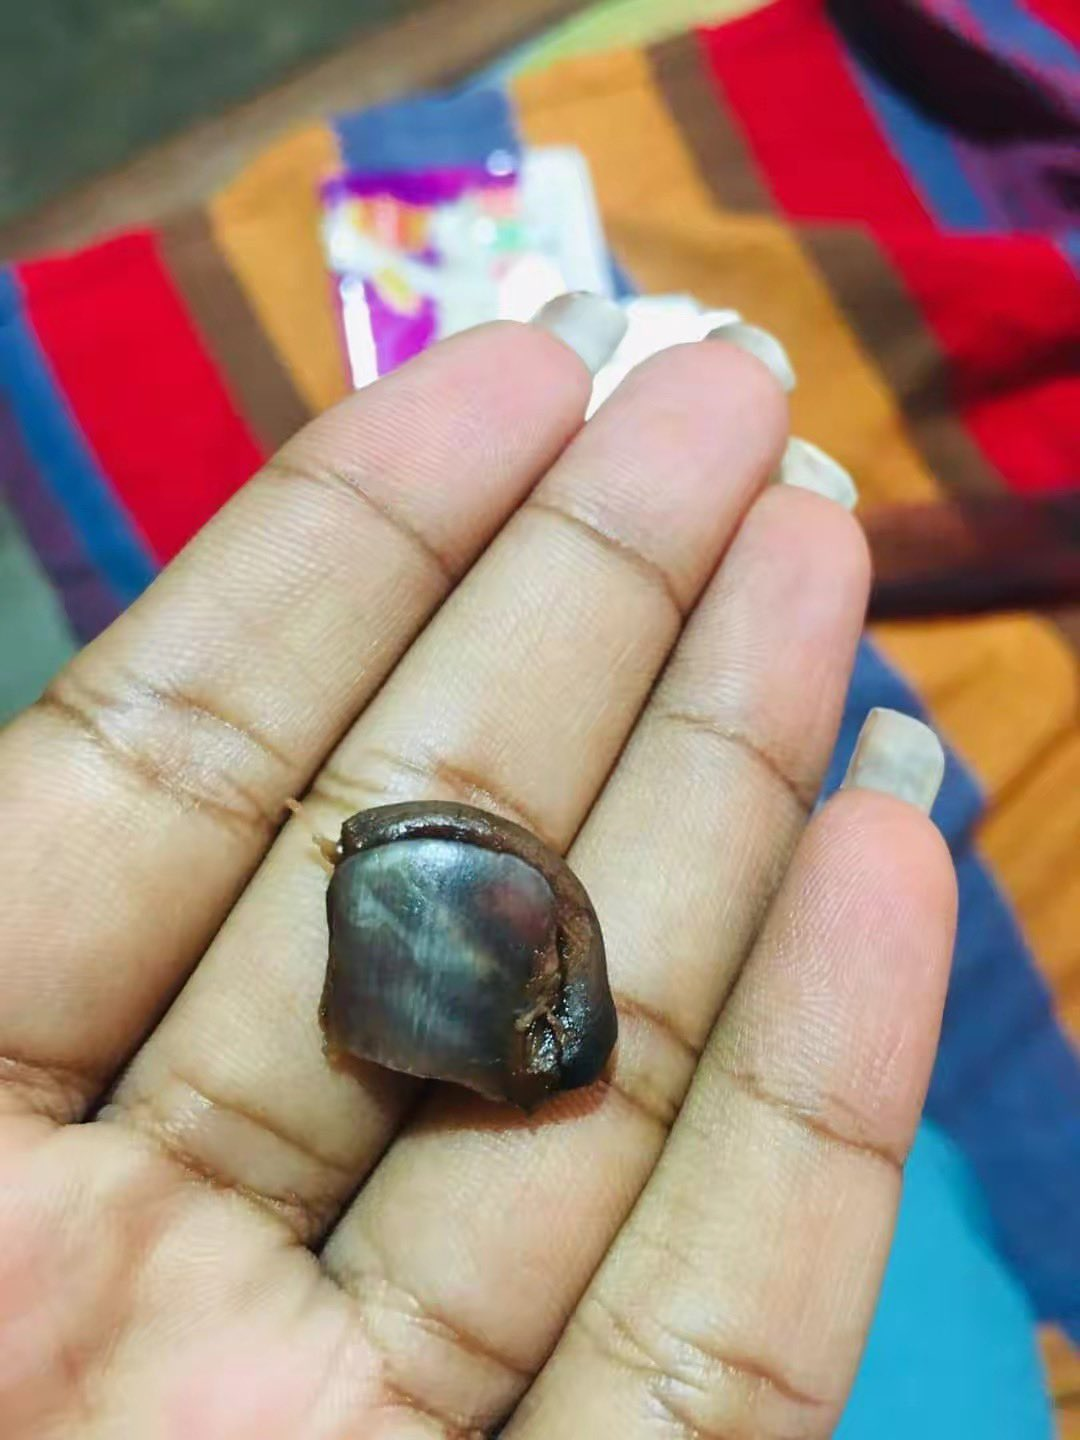 M'sian netizens shocked by photos showing human finger found inside chocolate